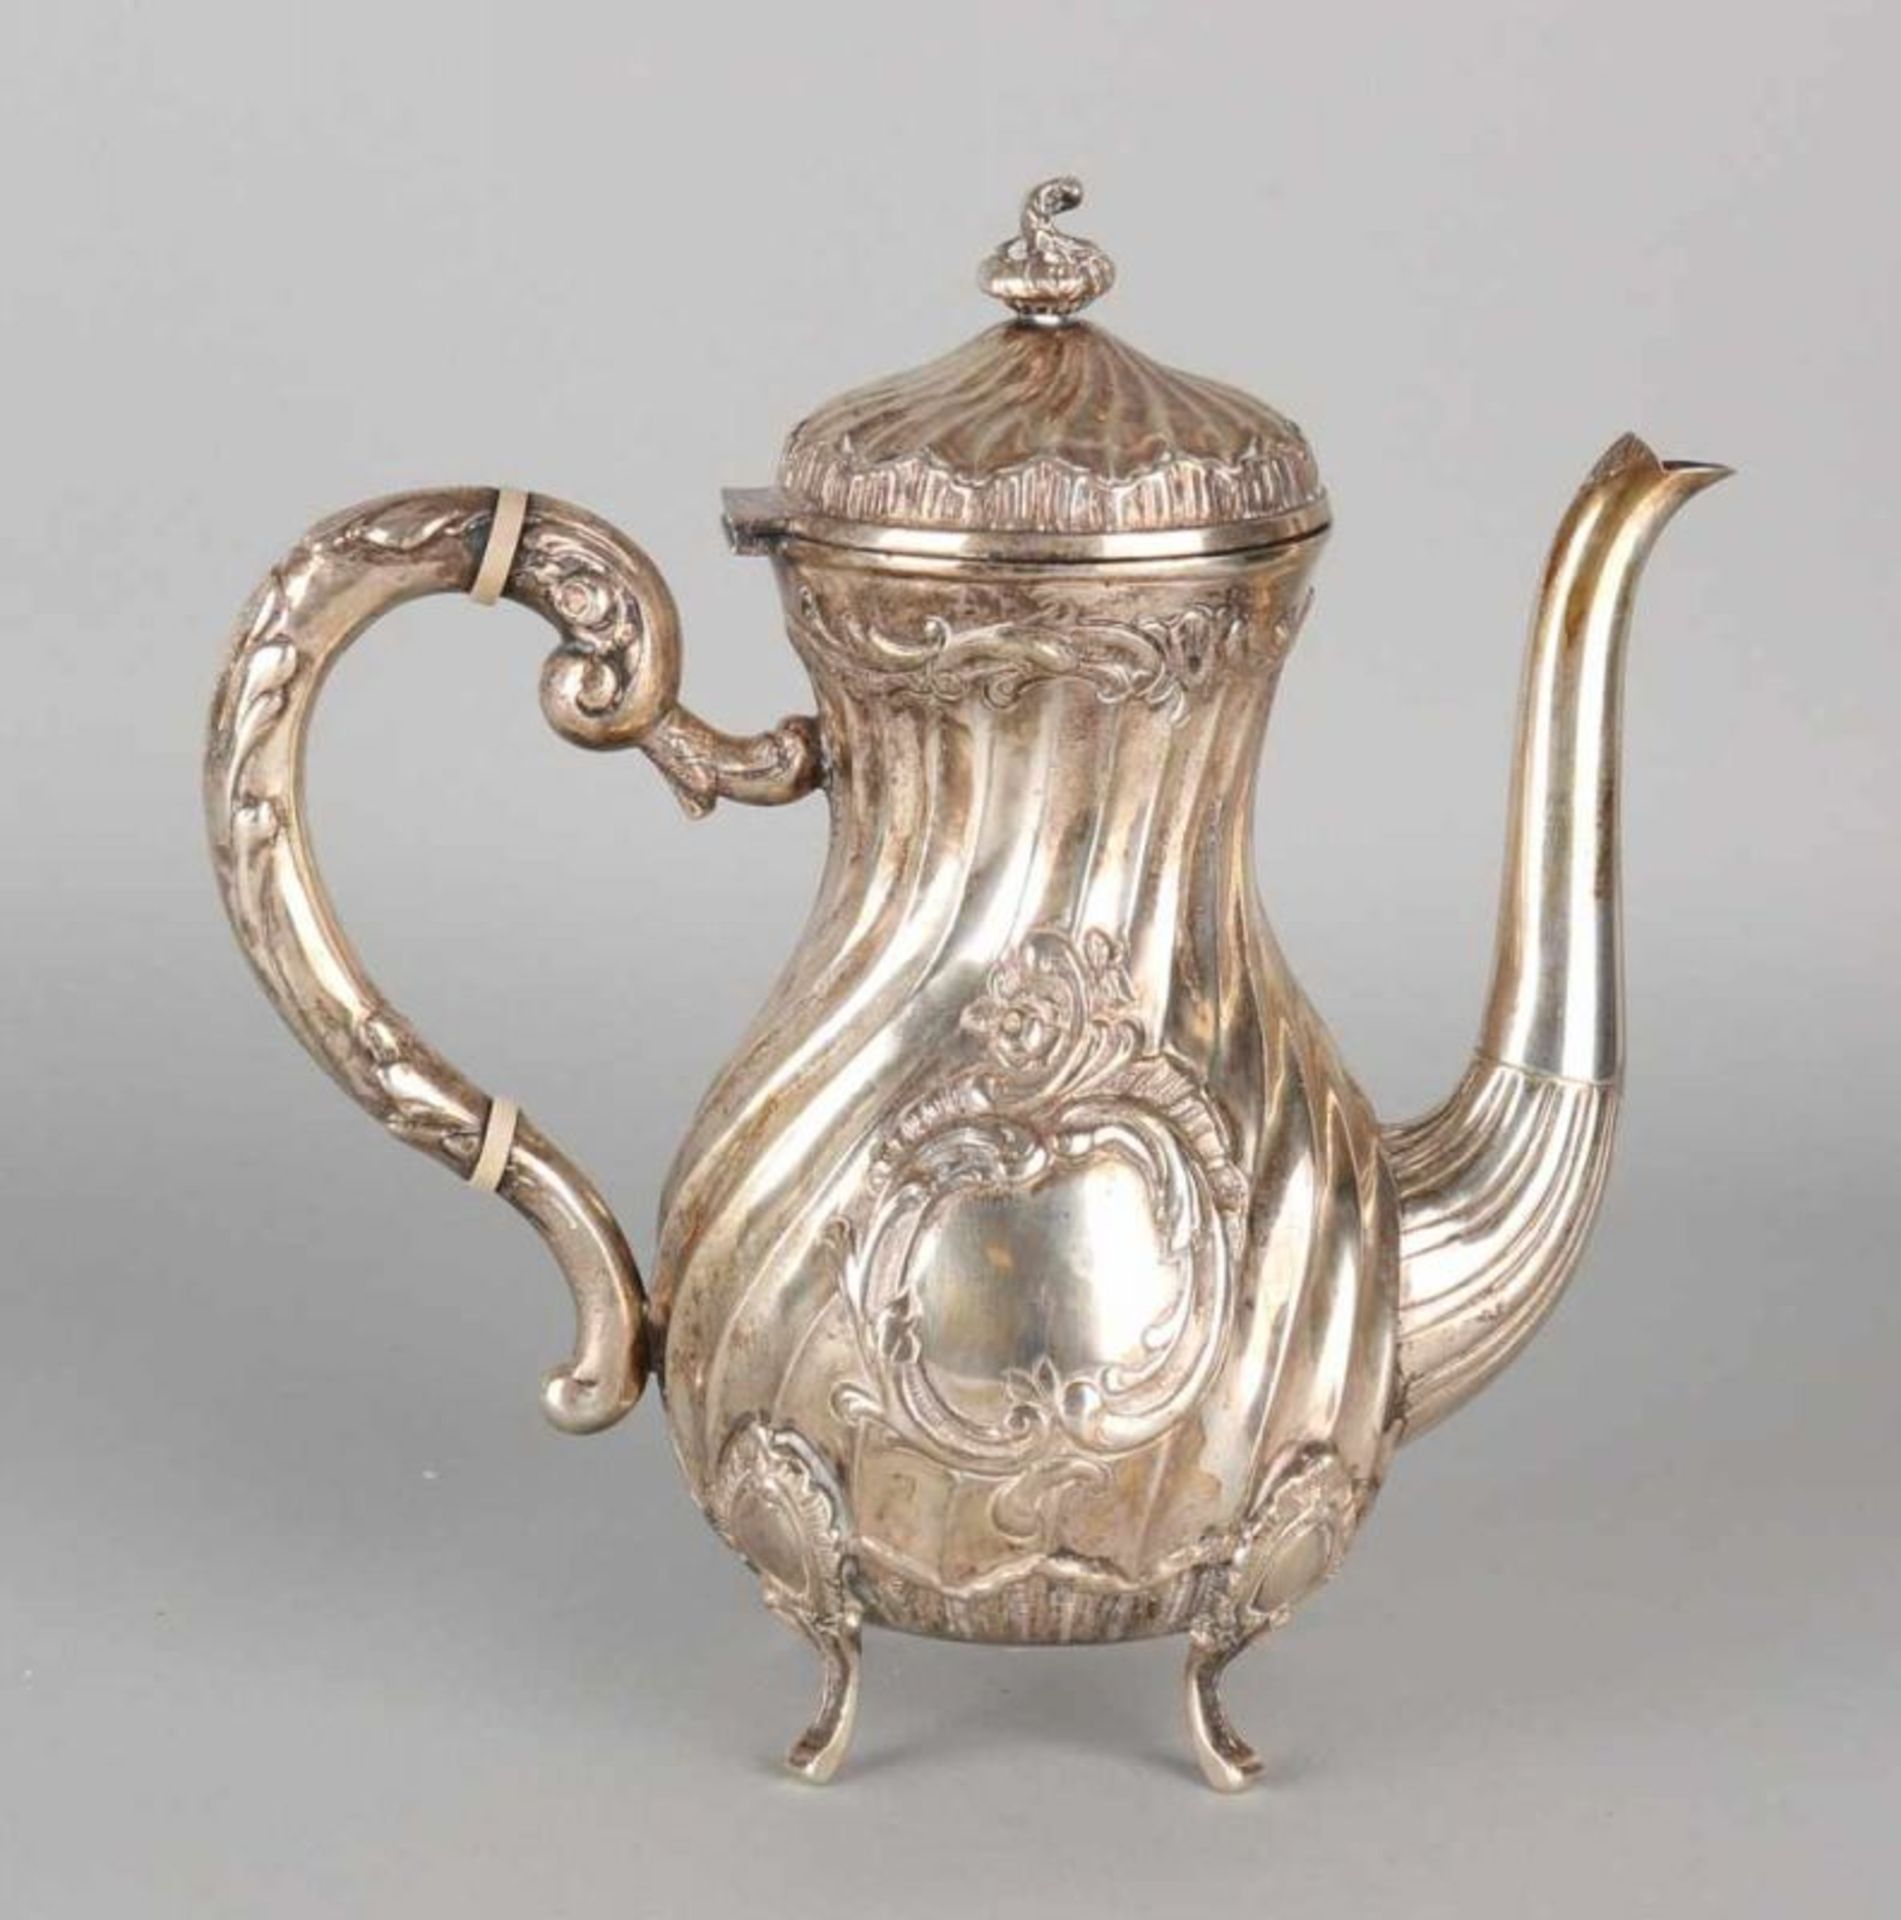 Silver coffeepot, 835/000, rococo style with a twisted operation and elaborated cartouche and